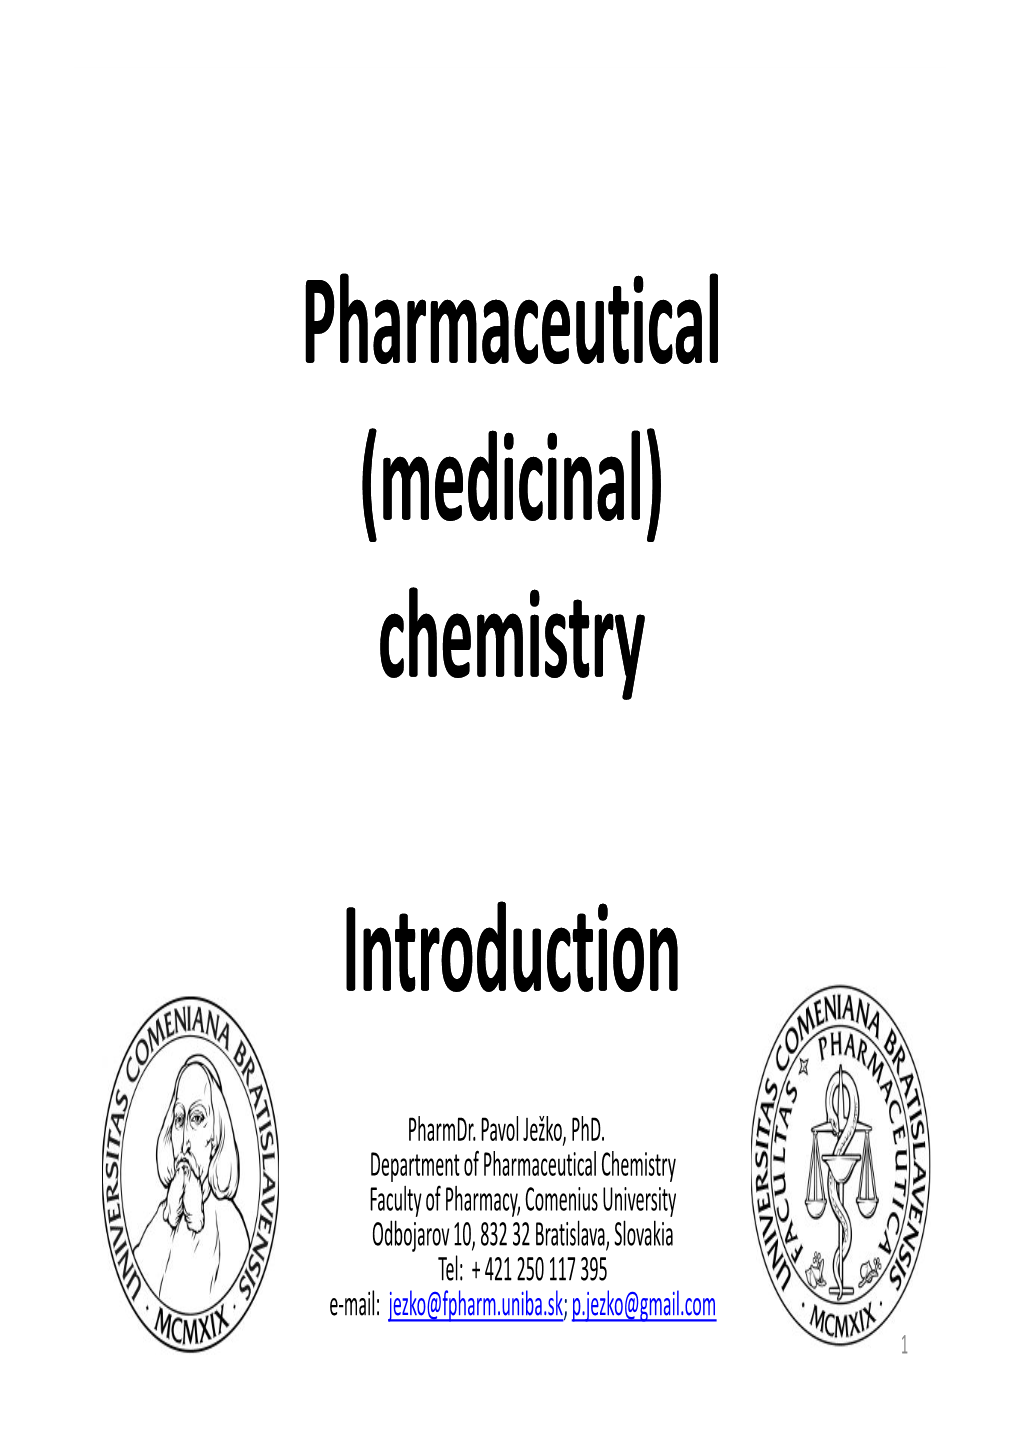 Pharmaceutical (Medicinal) Chemistry Introduction